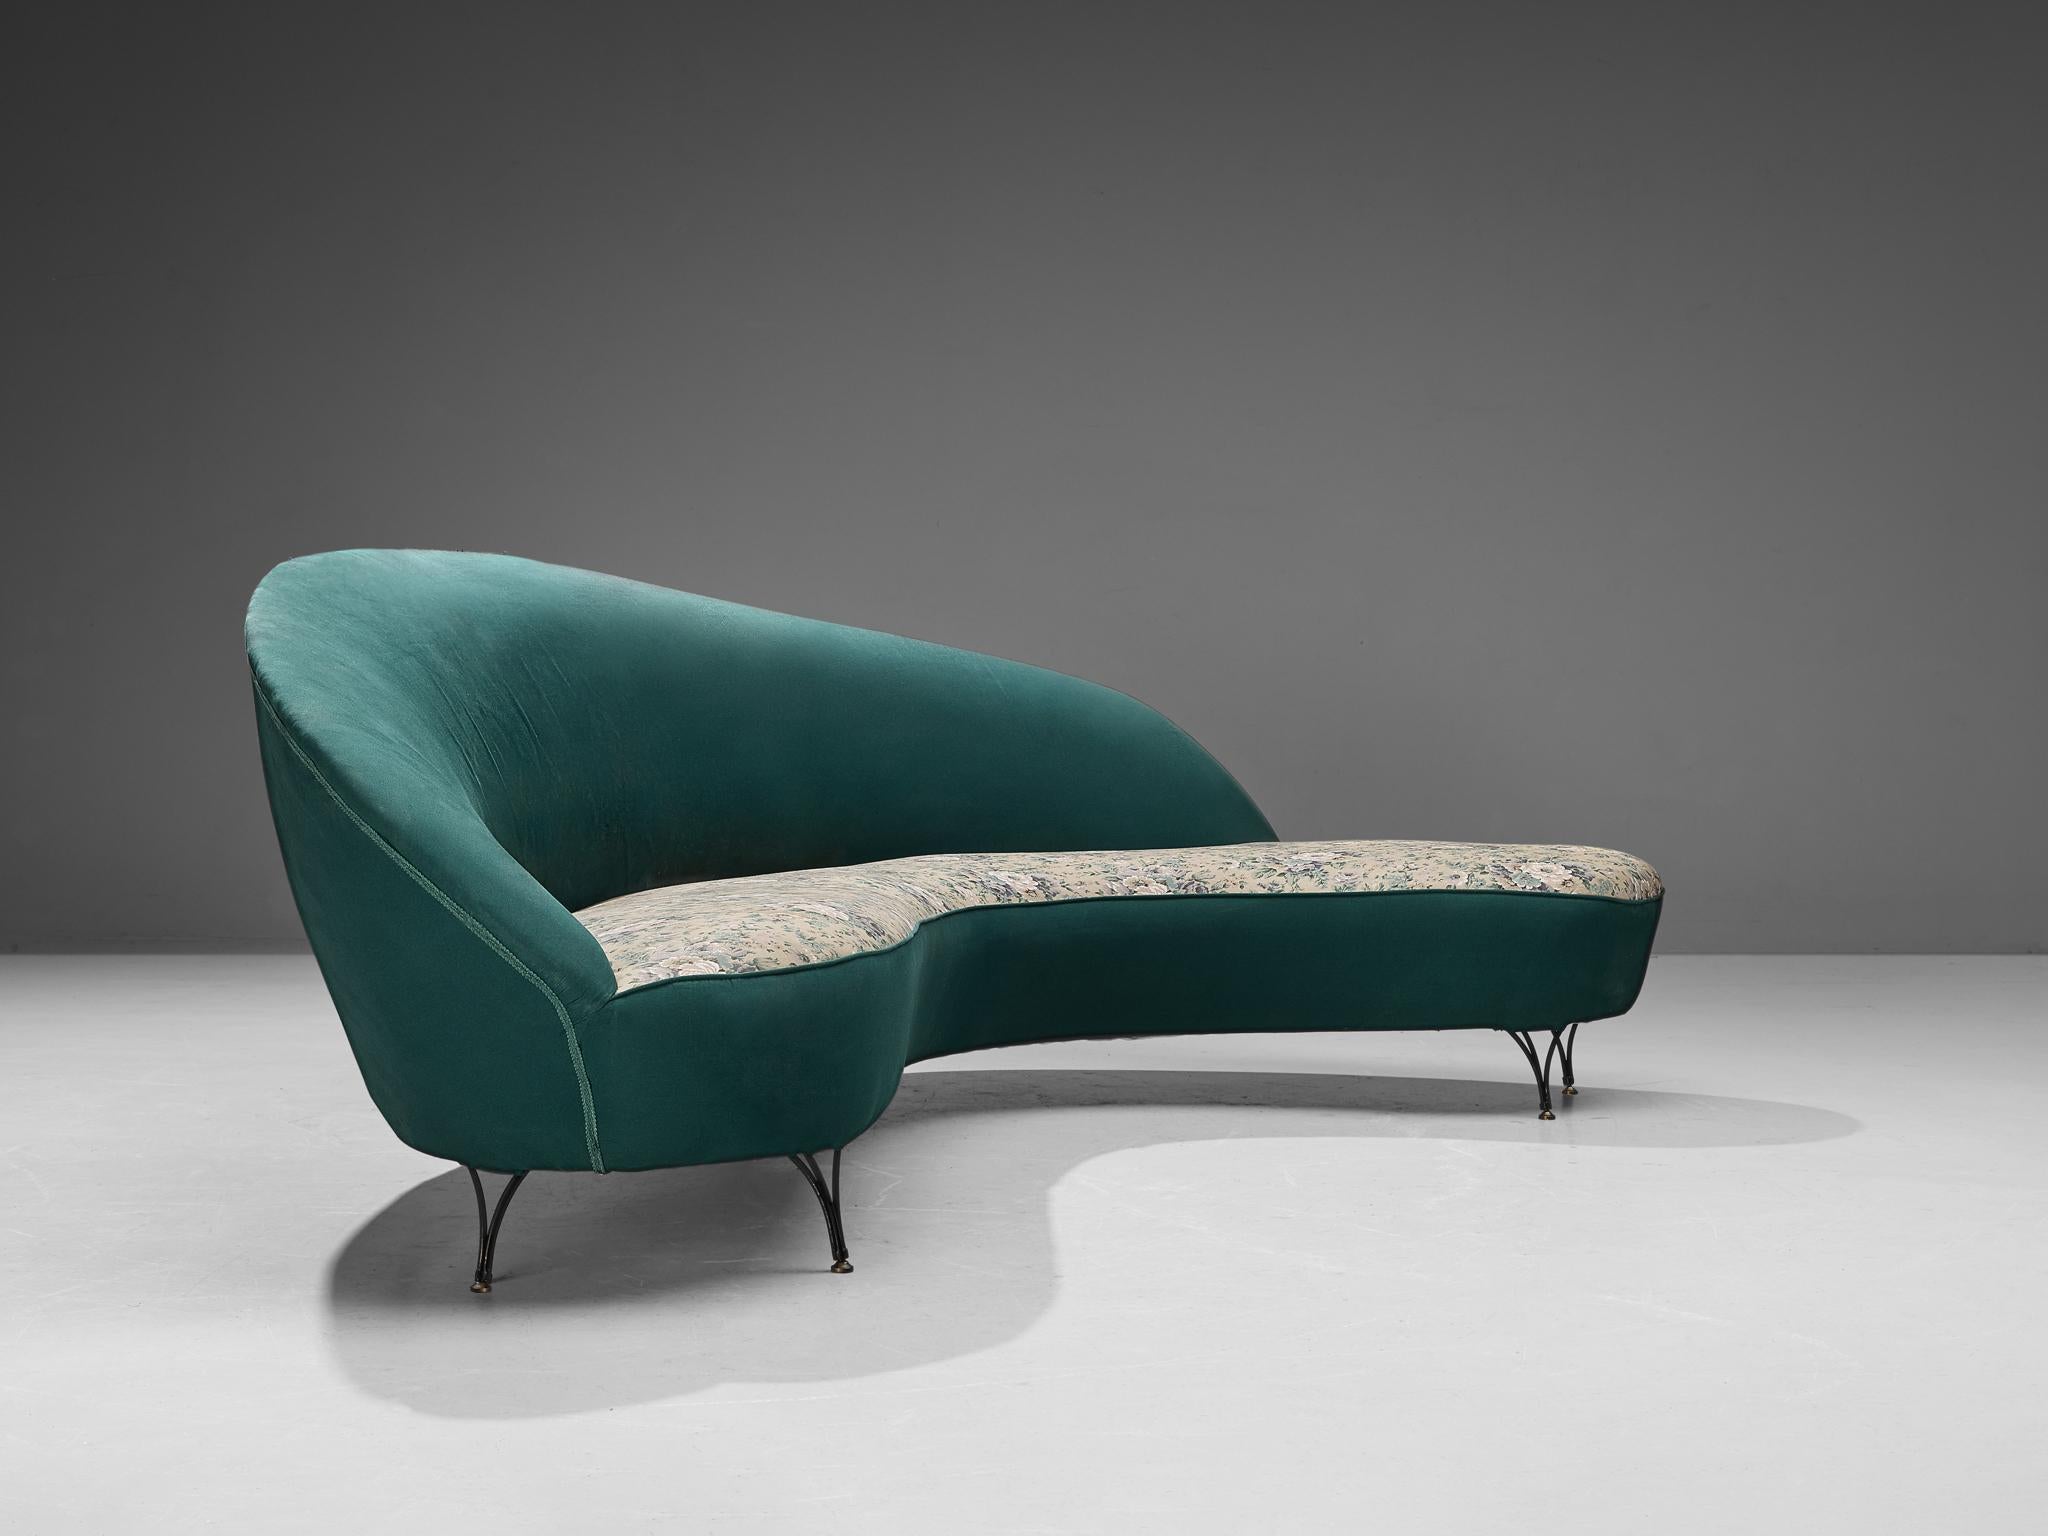 Metal Italian Freeform Curved Sofa in Green Upholstery